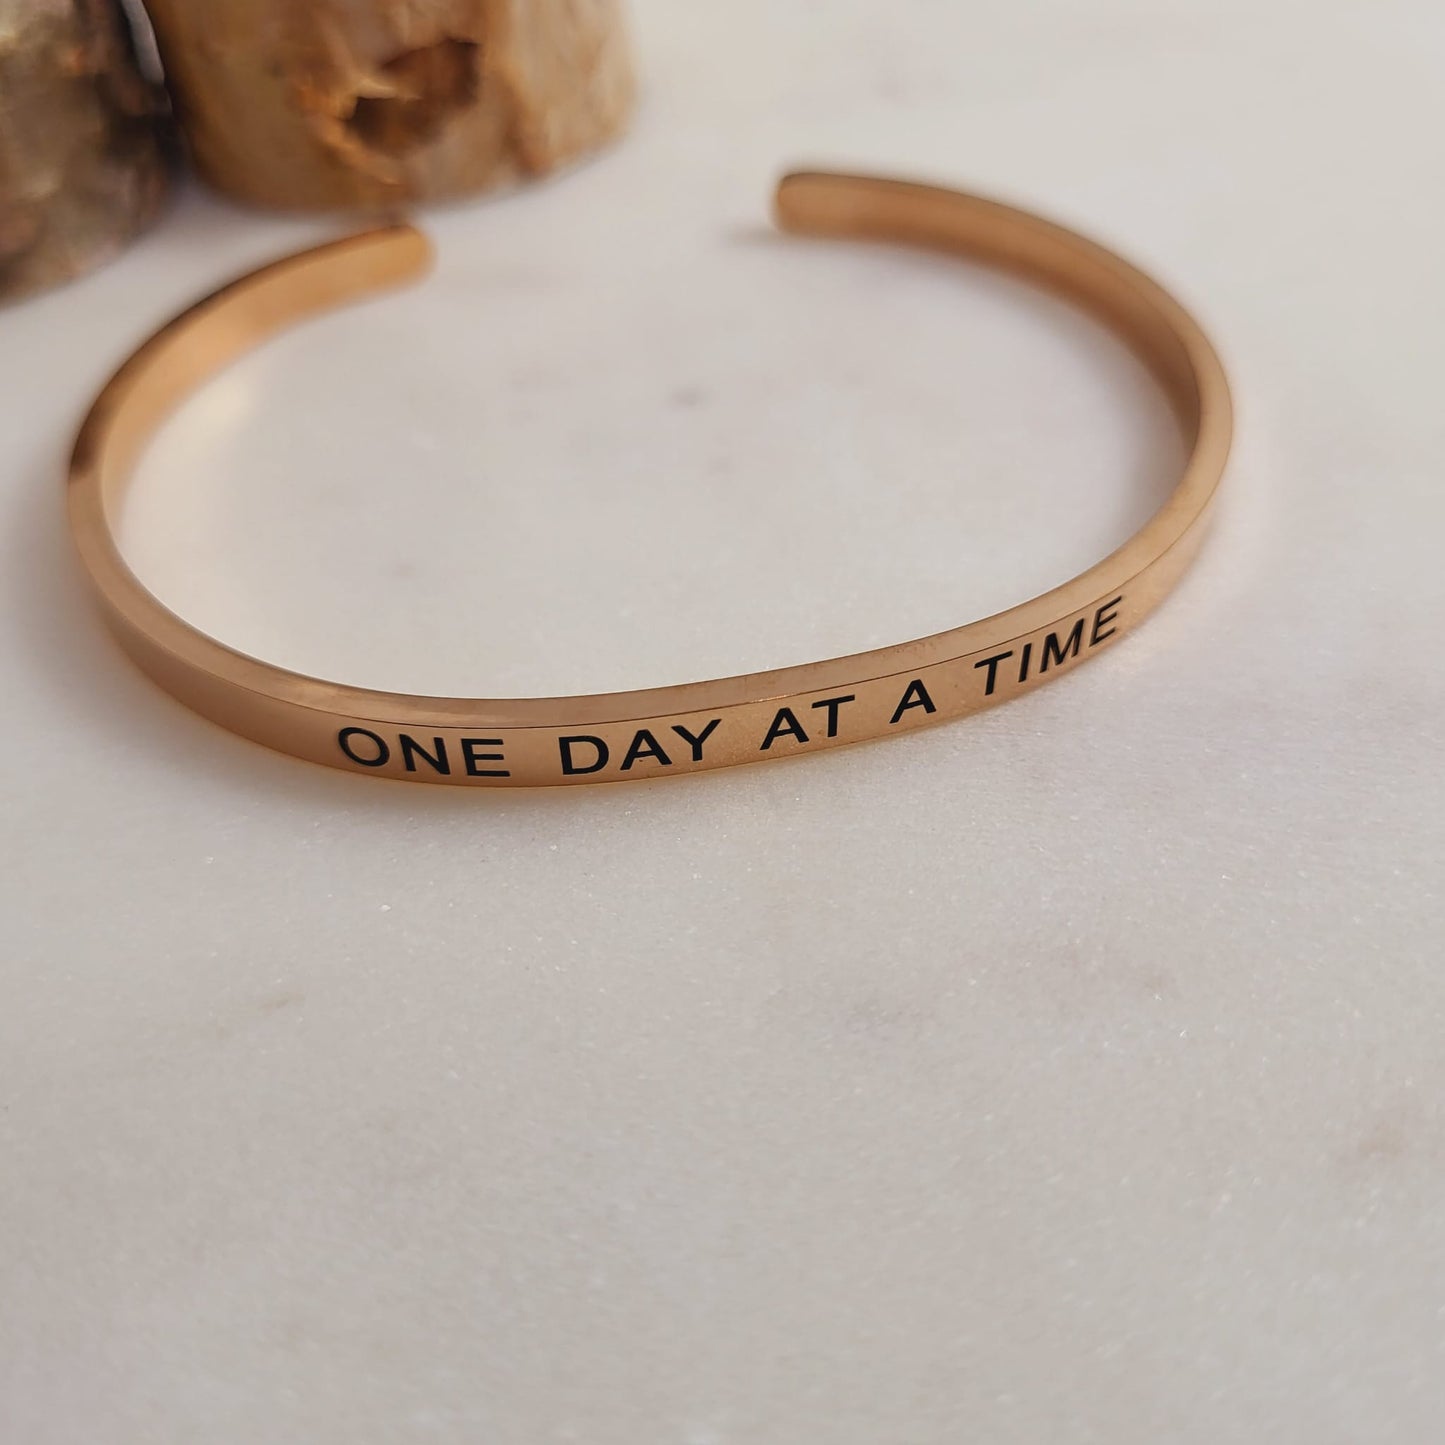 Wear Your Motivation - One day At a Time Bracelets